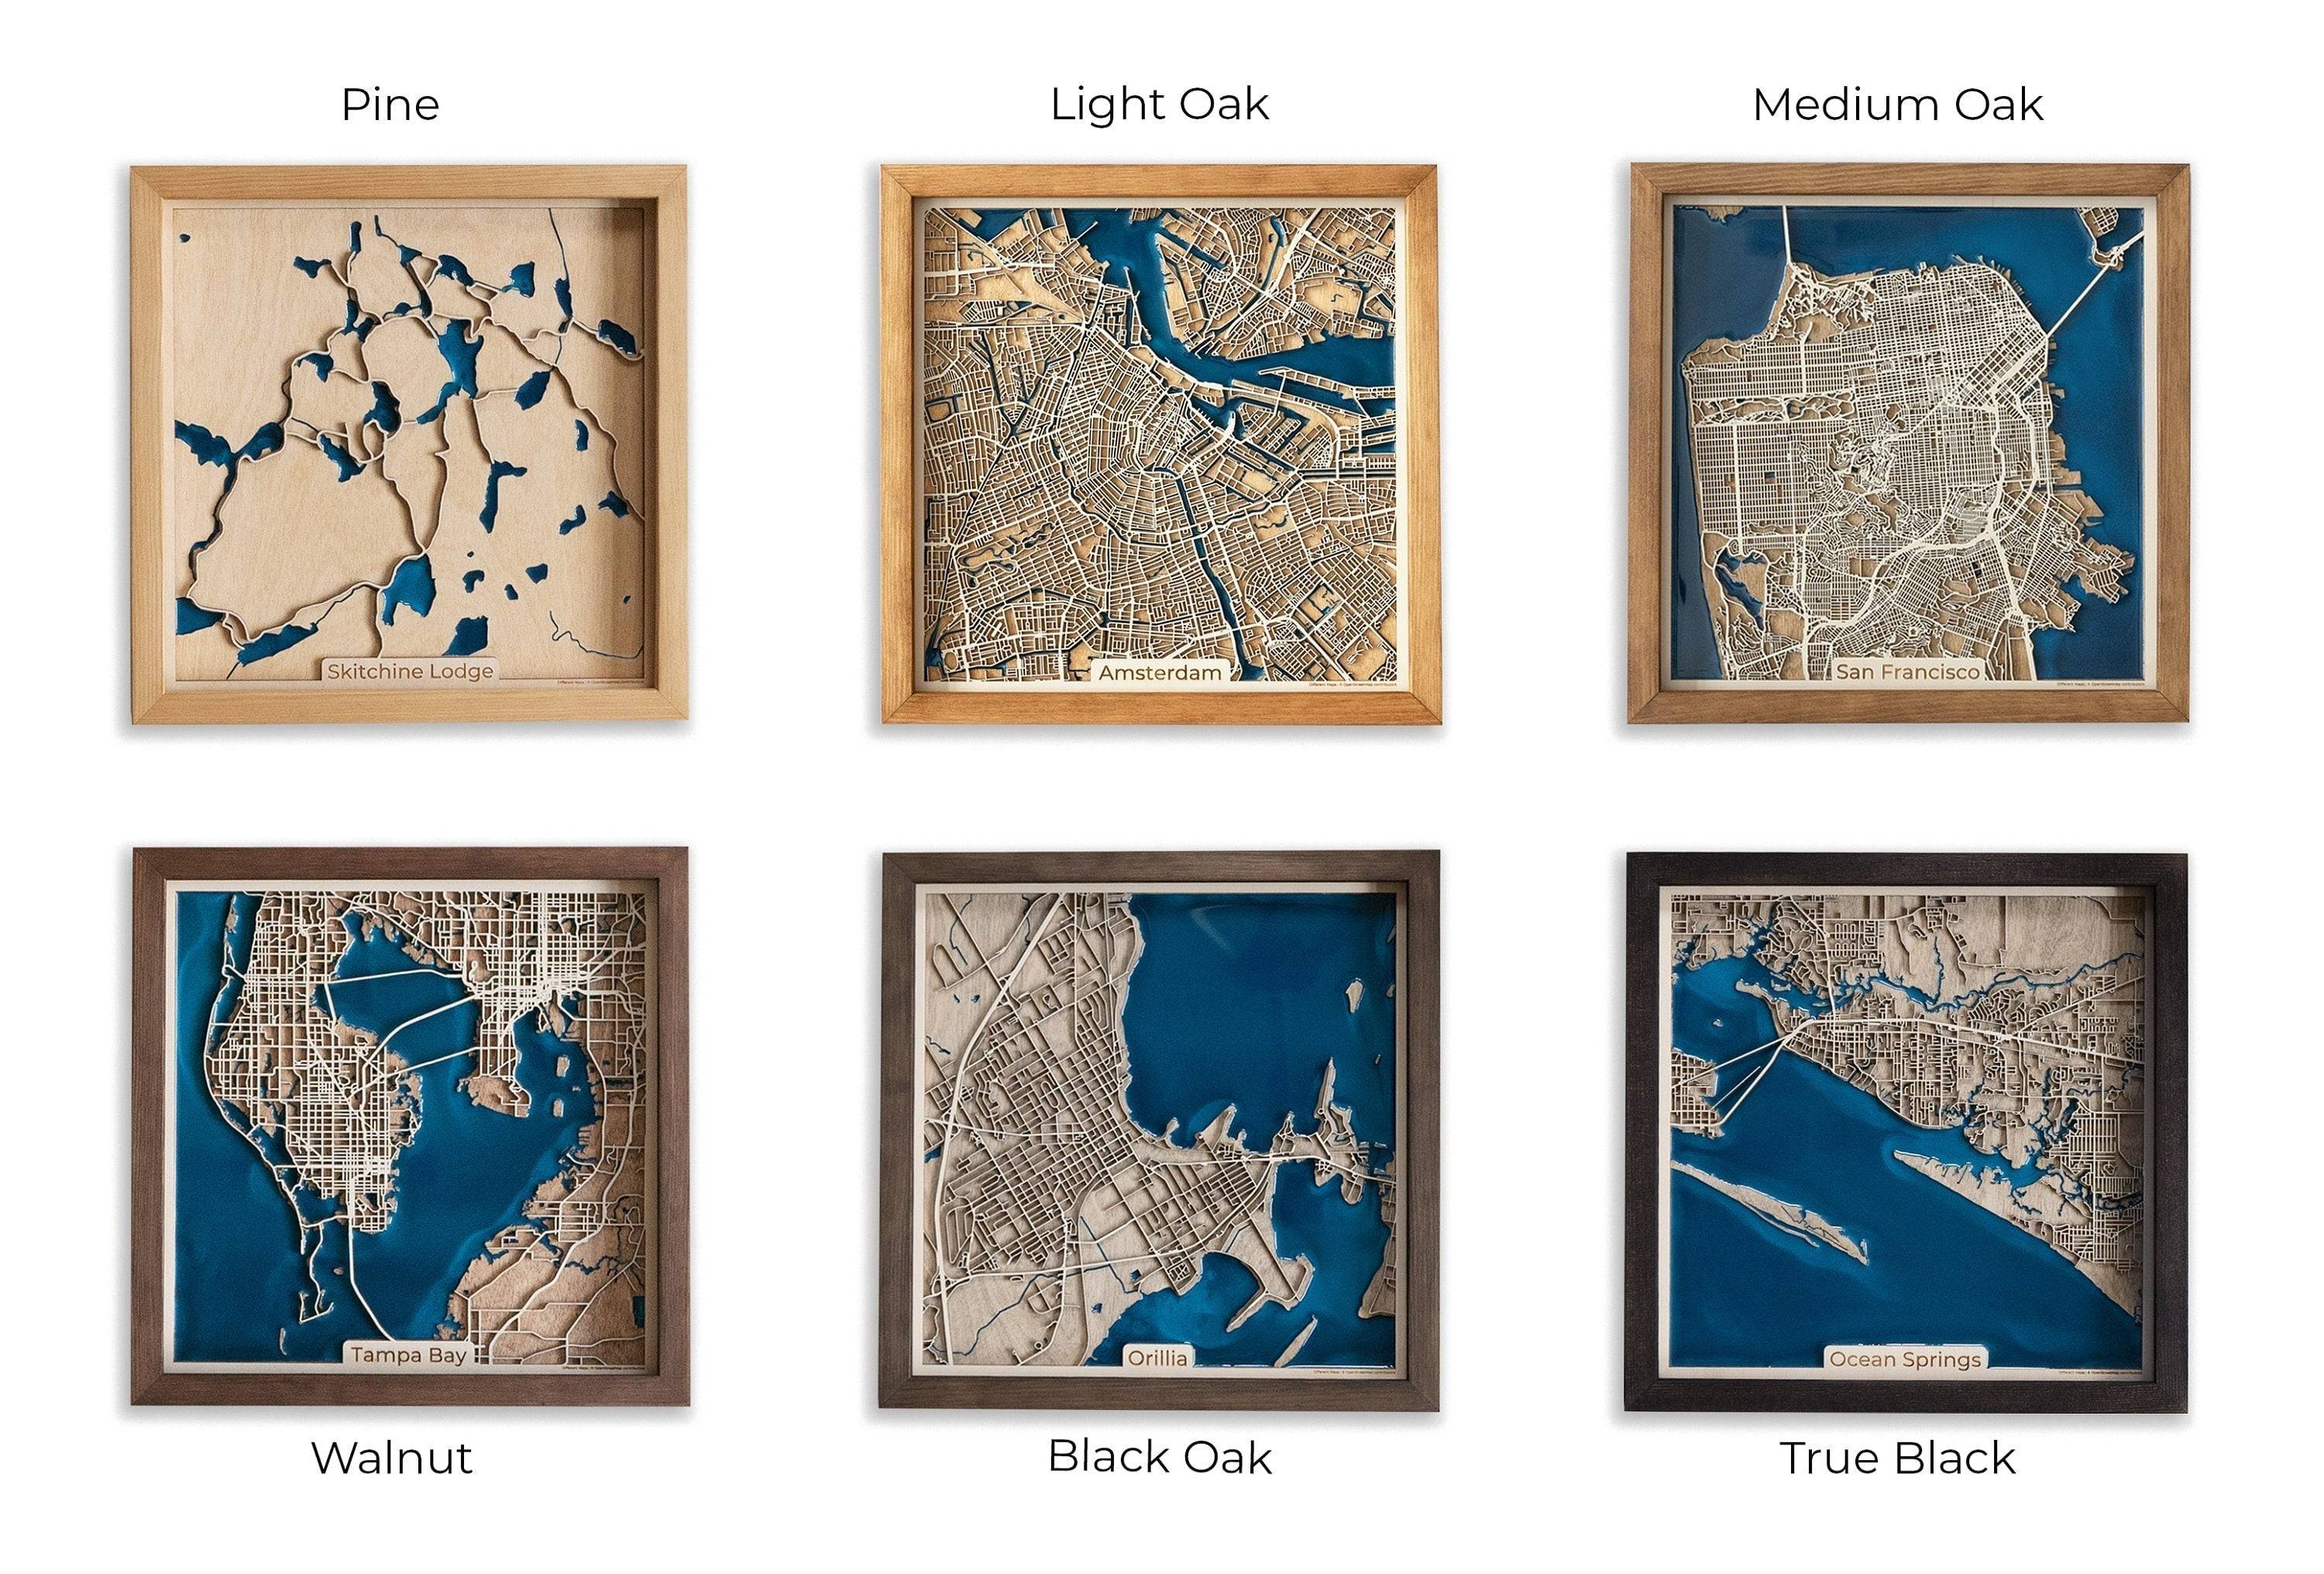 You can choose from 6 wood colors: Pine, Light Oak, Medium Oak, Walnut, Black Oak and True Black. Match the color of your map to your interior.